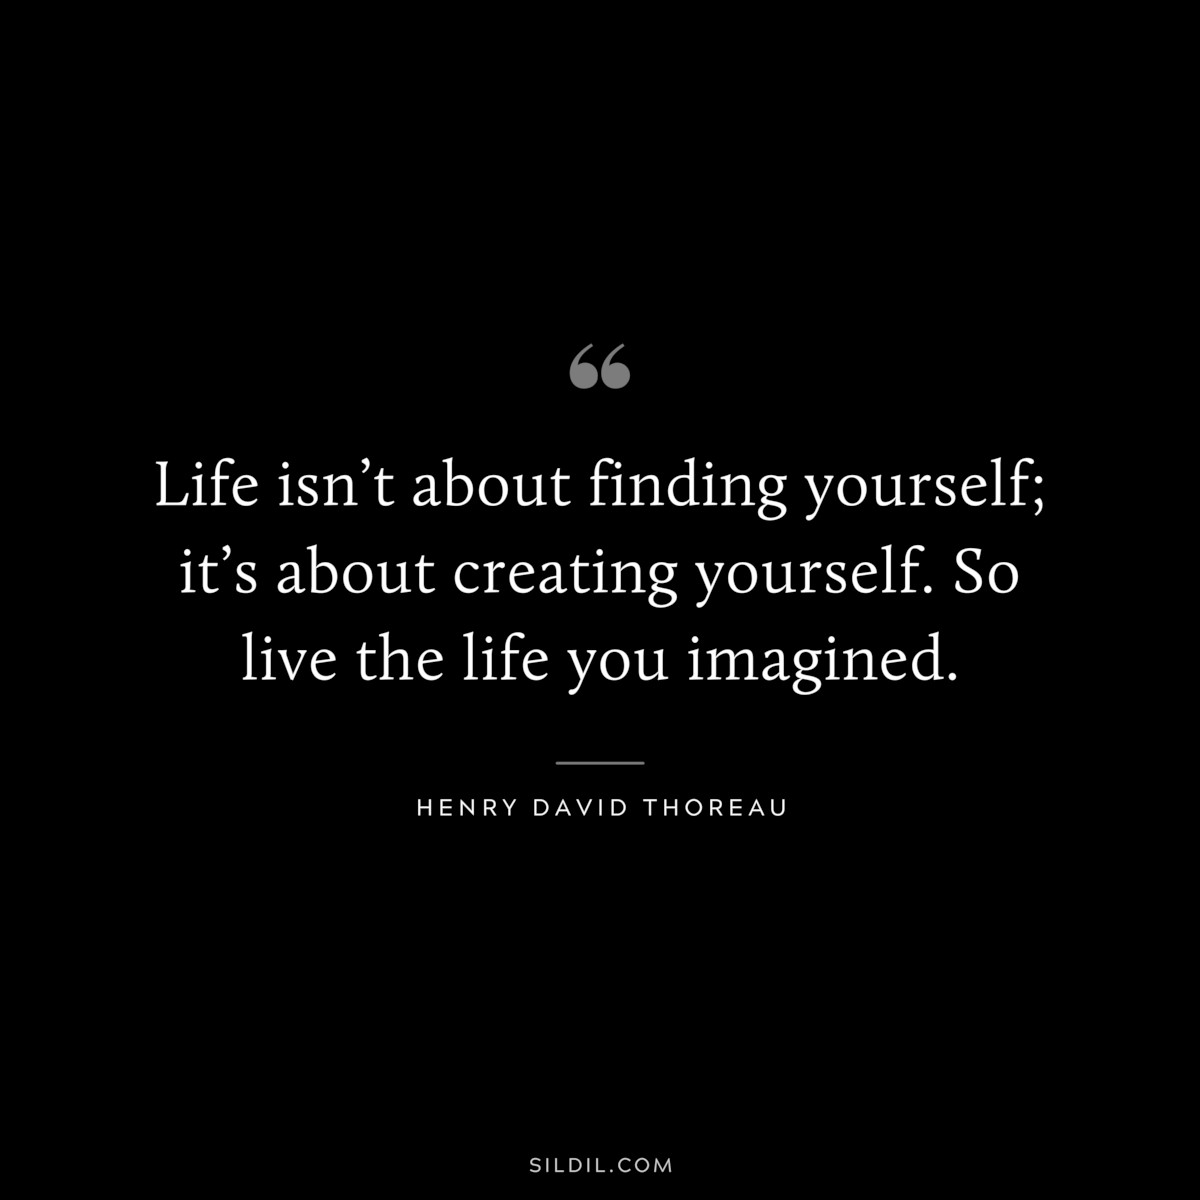 Life isn’t about finding yourself; it’s about creating yourself. So live the life you imagined. ― Henry David Thoreau